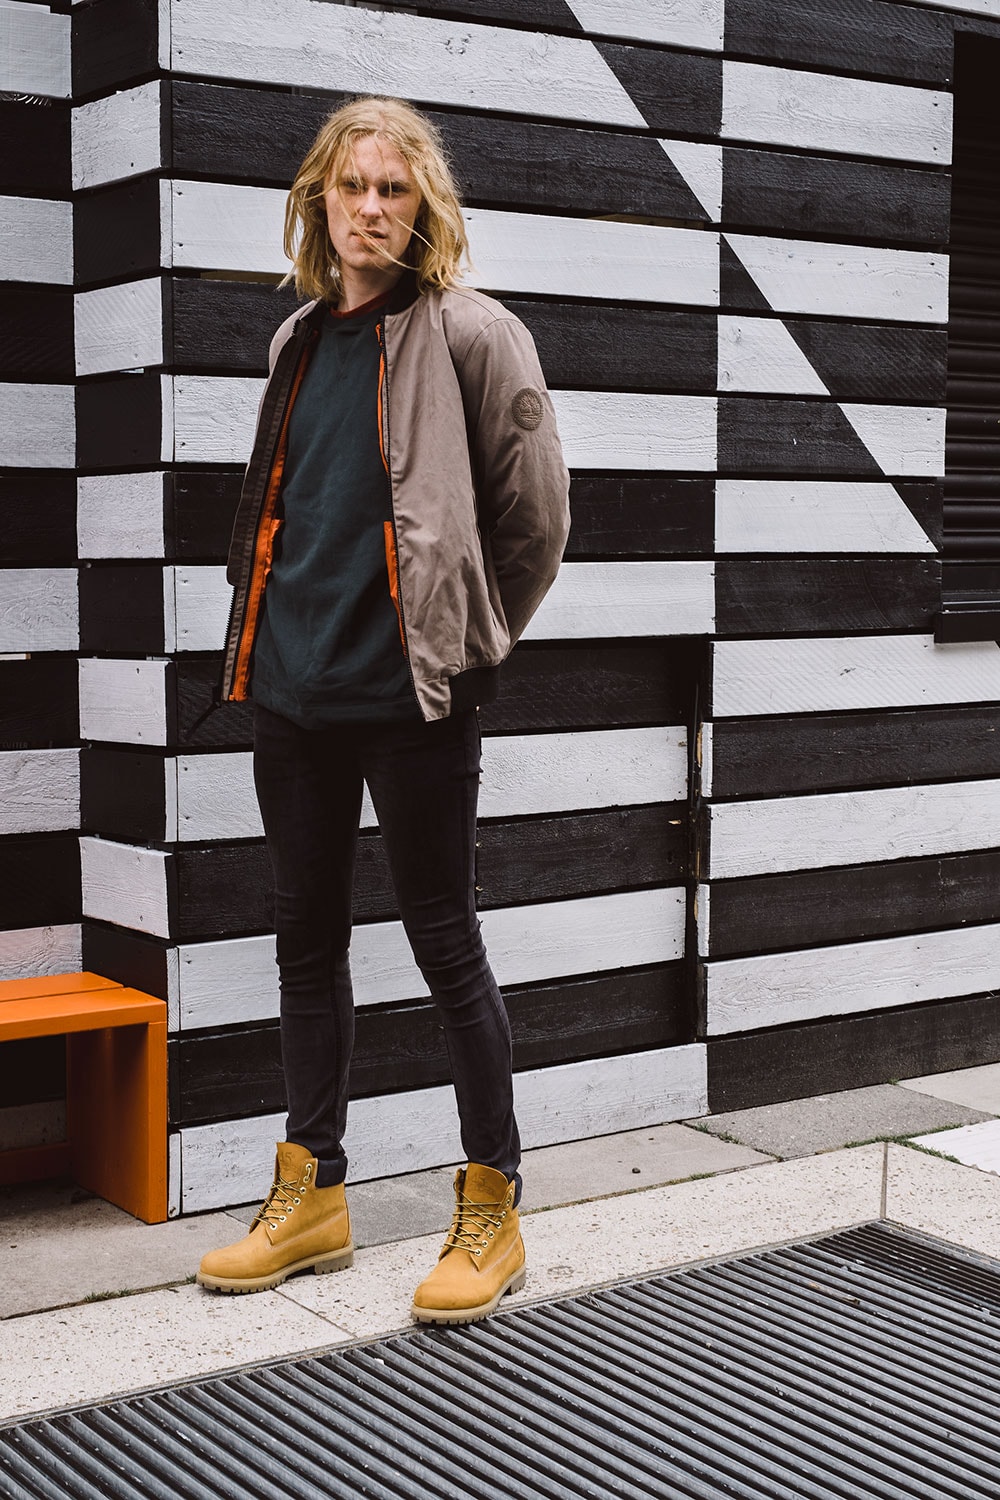 Timberland Celebrate the Icons Campaign to Commemorate 45 Years of the Yellow Boot Unsplash